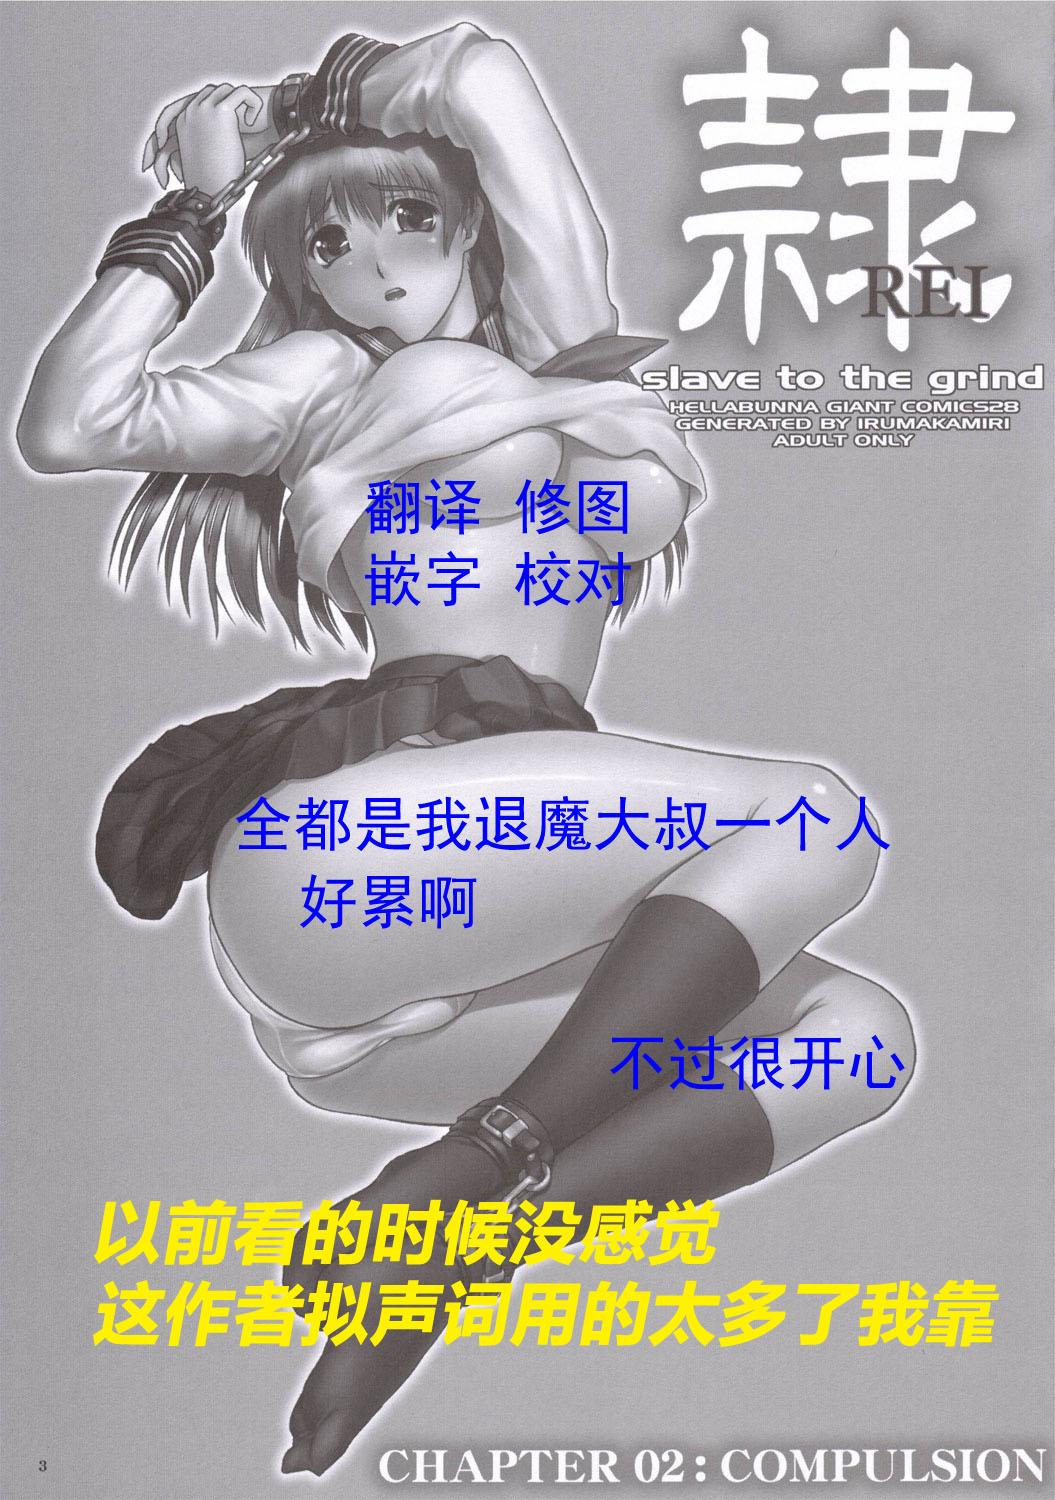 Sexy (C69) [Hellabunna (Iruma Kamiri)] REI - slave to the grind - CHAPTER 02: COMPULSION (Dead or Alive) [Chinese] [退魔大叔个人汉化] - Dead or alive Beautiful - Page 3